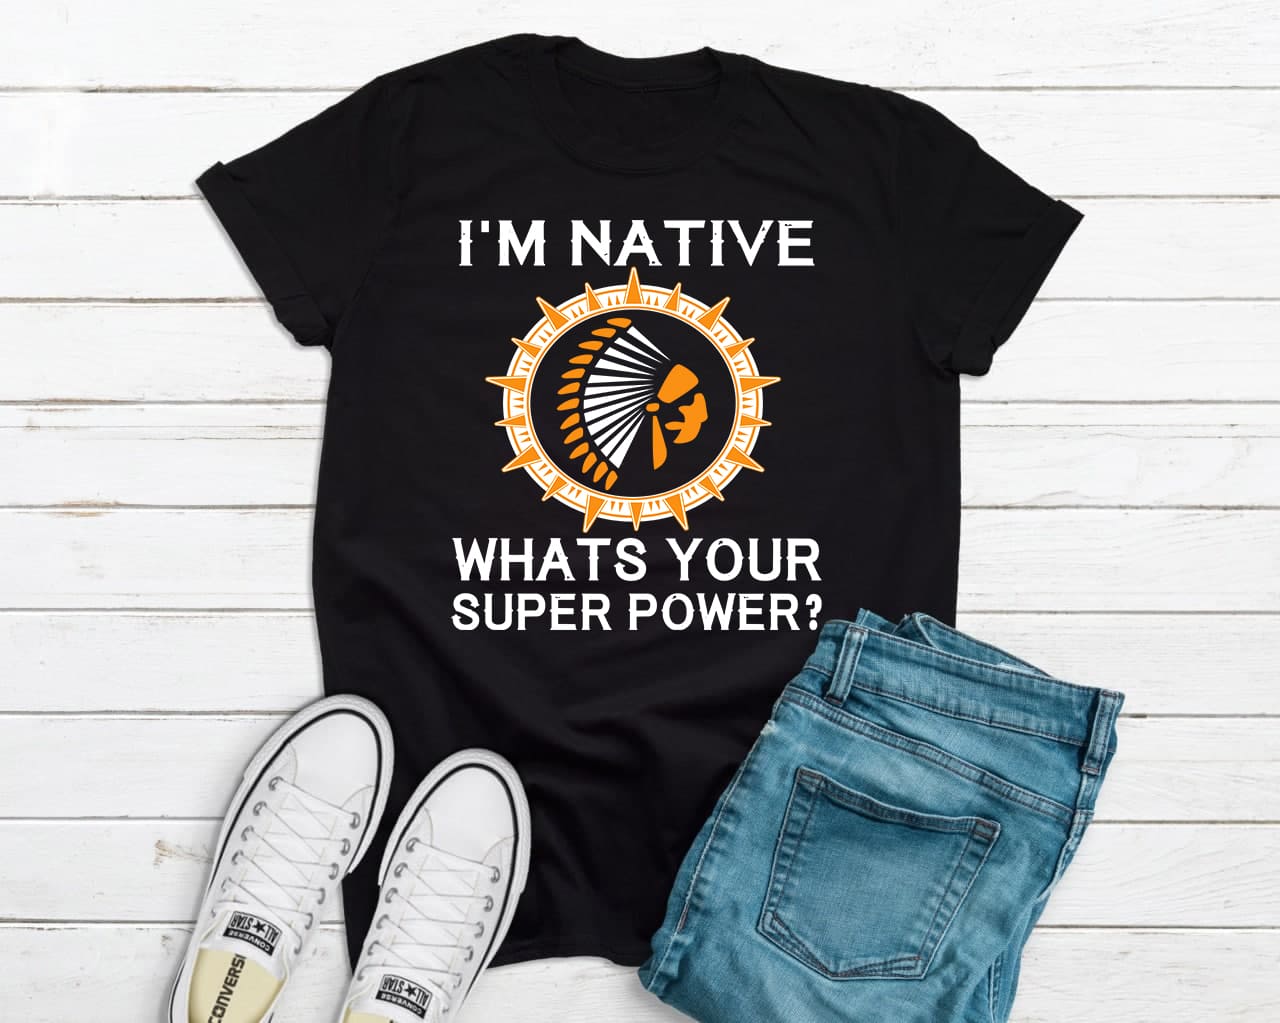 I'm Native whats your super power - Native American T-shirt, Native the superpower